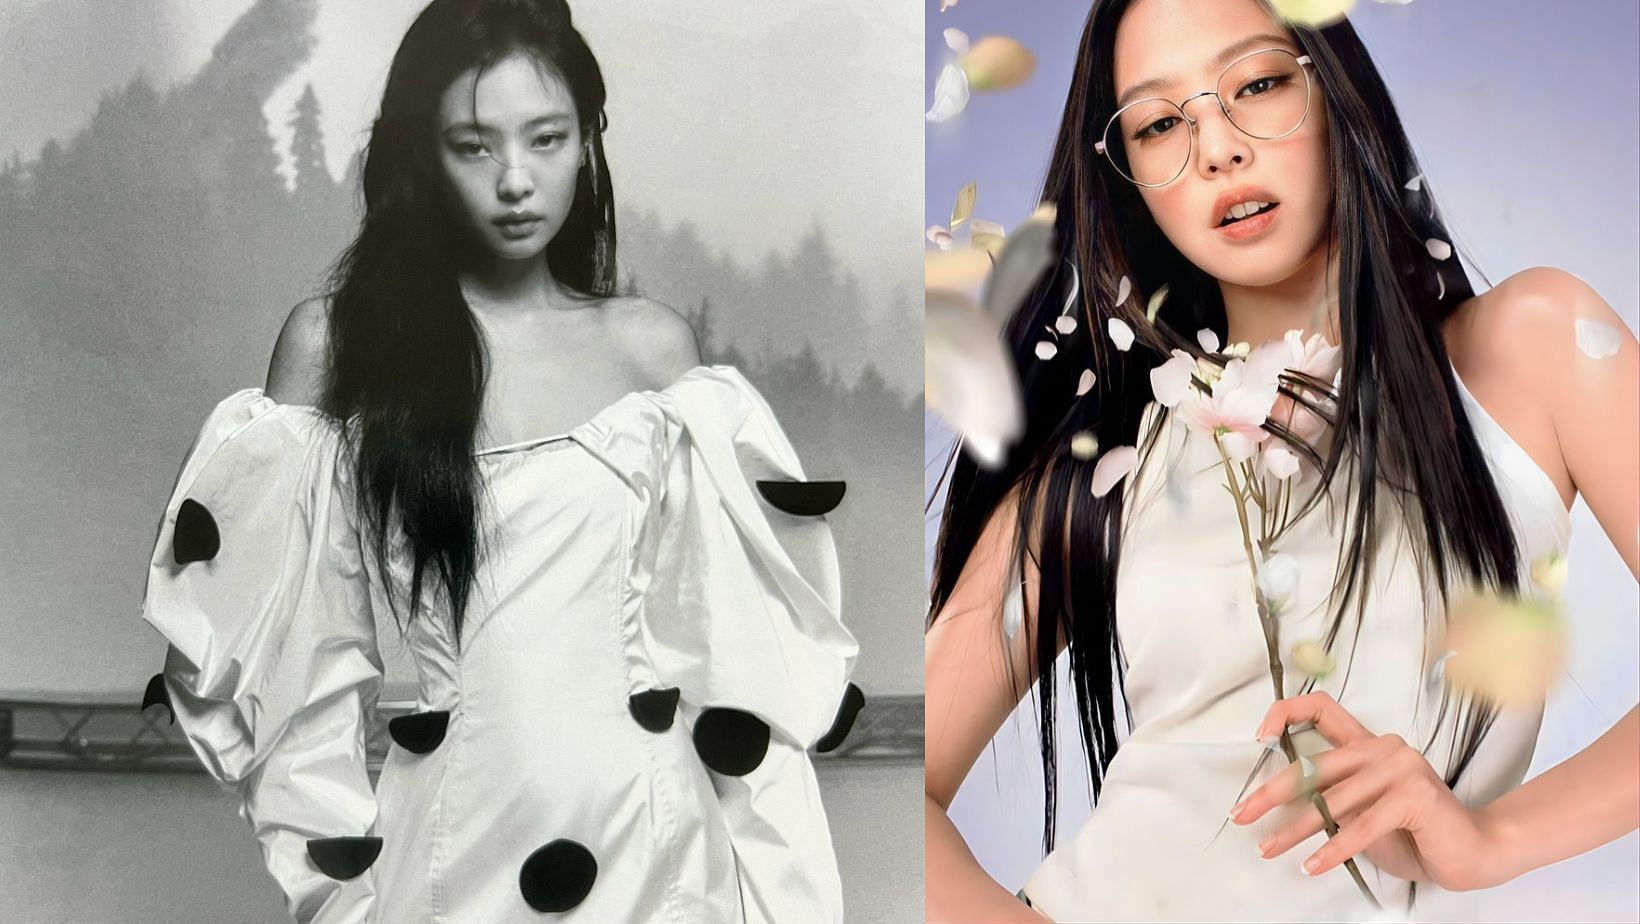 Featuring Jennie of BLACKPINK. (Images via Twitter/@QueenJENNIE_CN and @cafewindows)